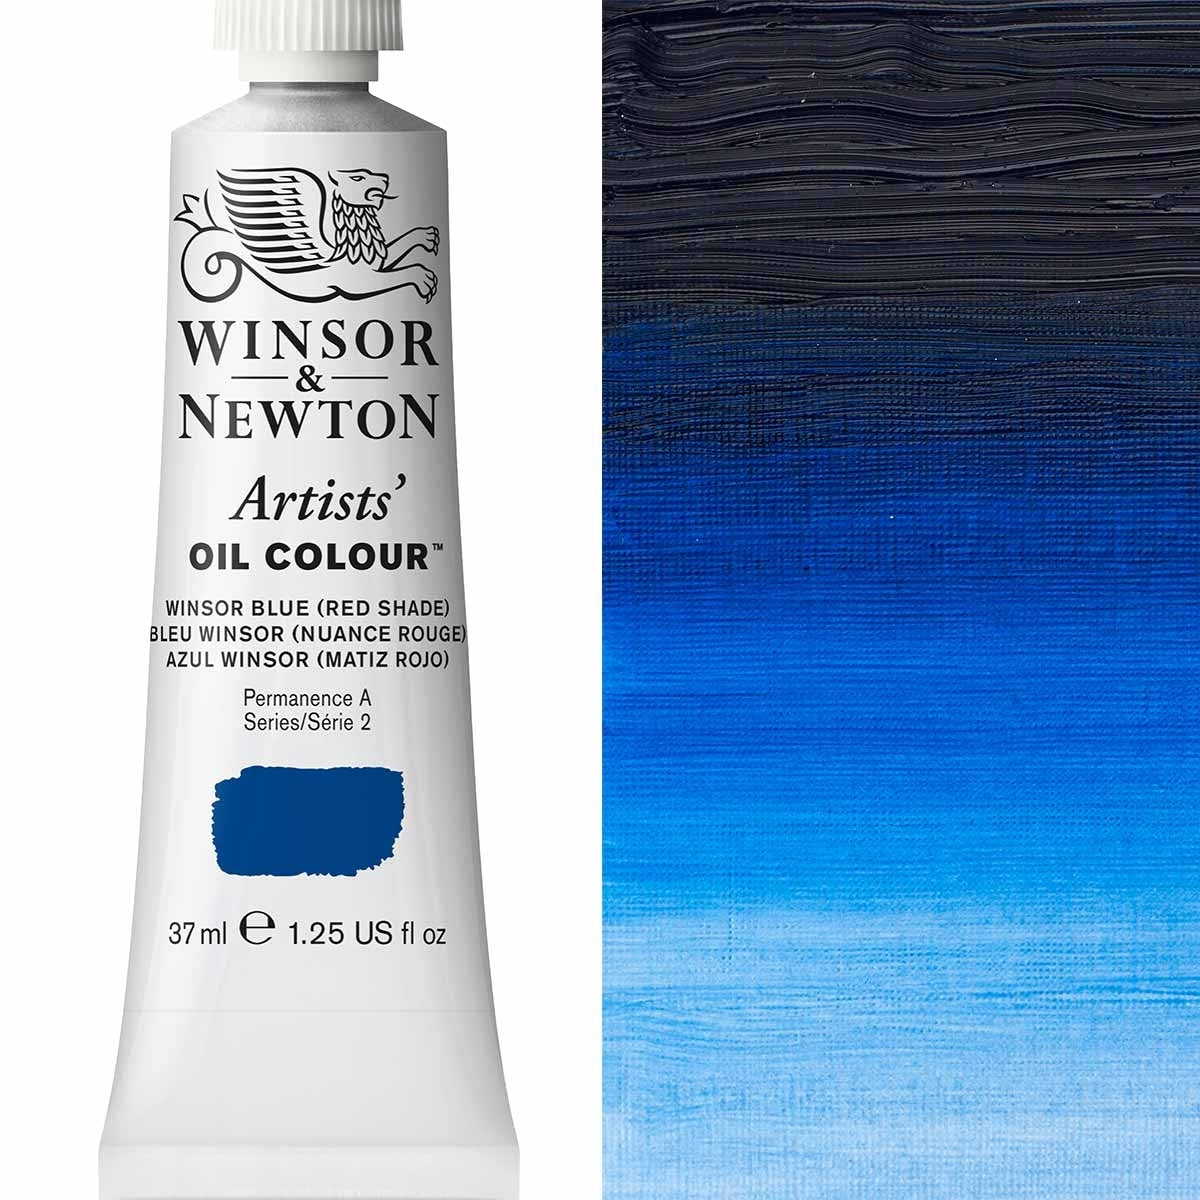 Winsor and Newton - Artists' Oil Colour - 37ml - Winsor Blue Red Shade